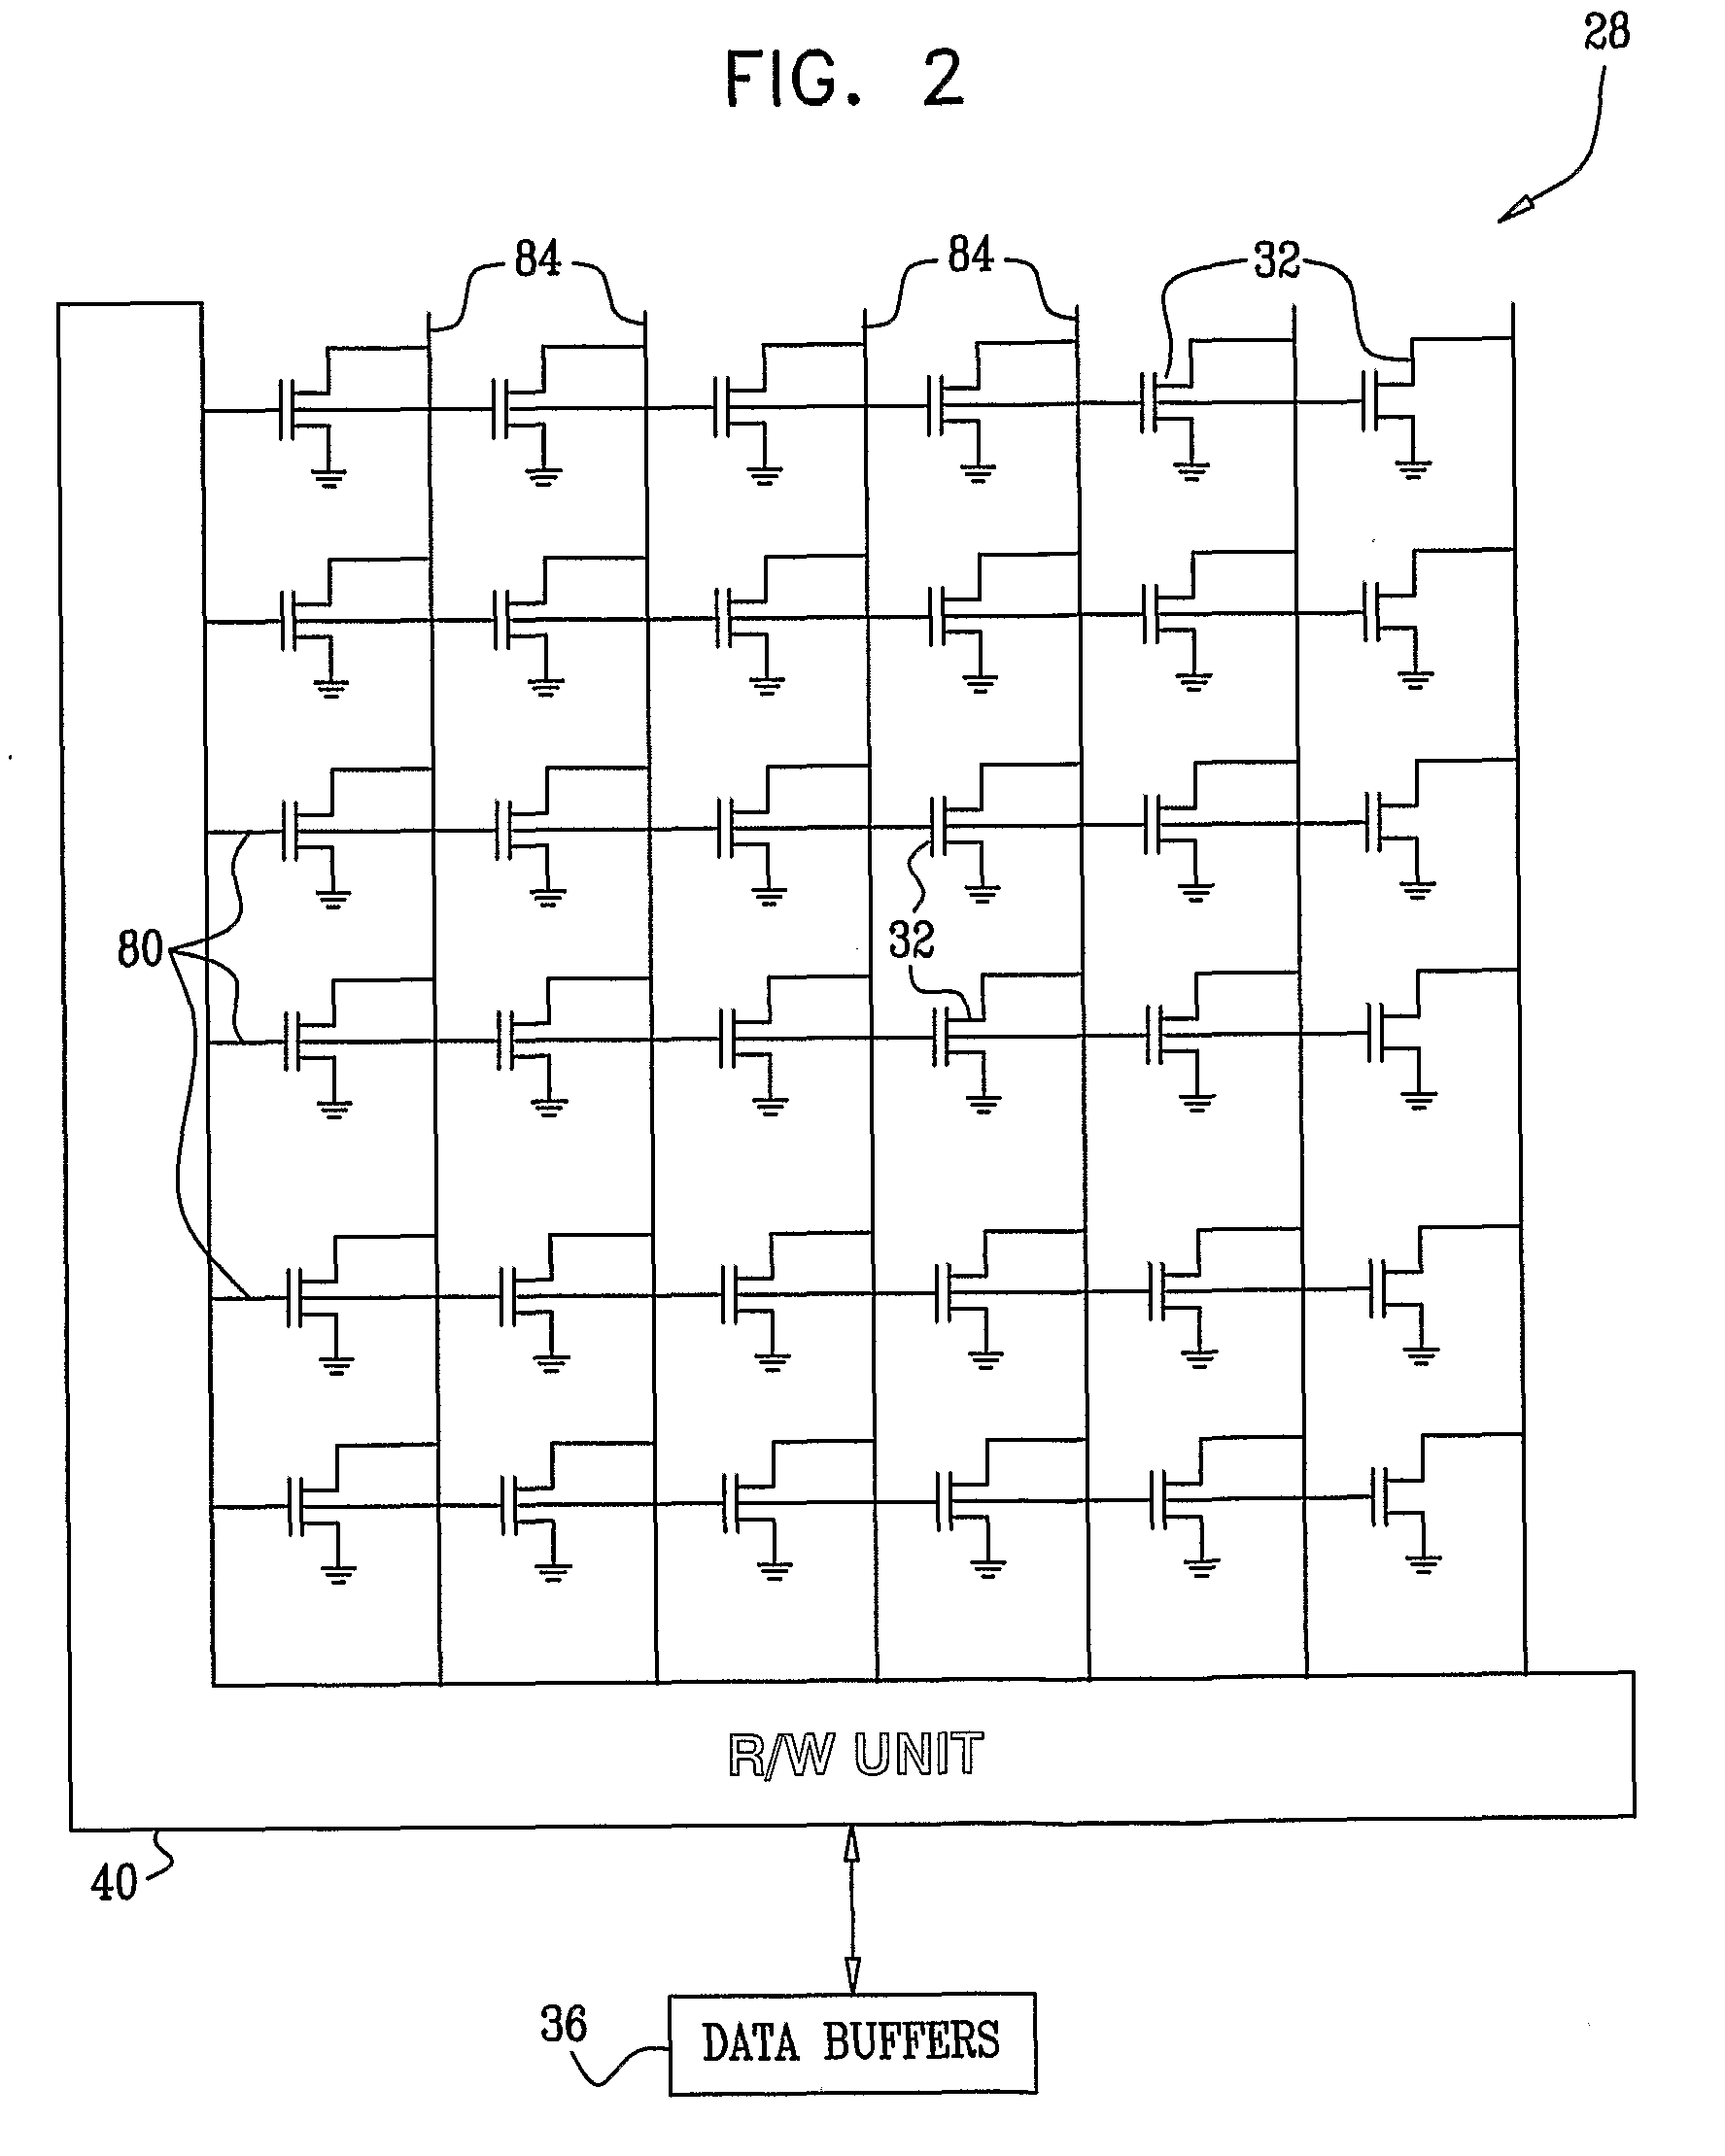 Distortion Estimation And Cancellation In Memory Devices